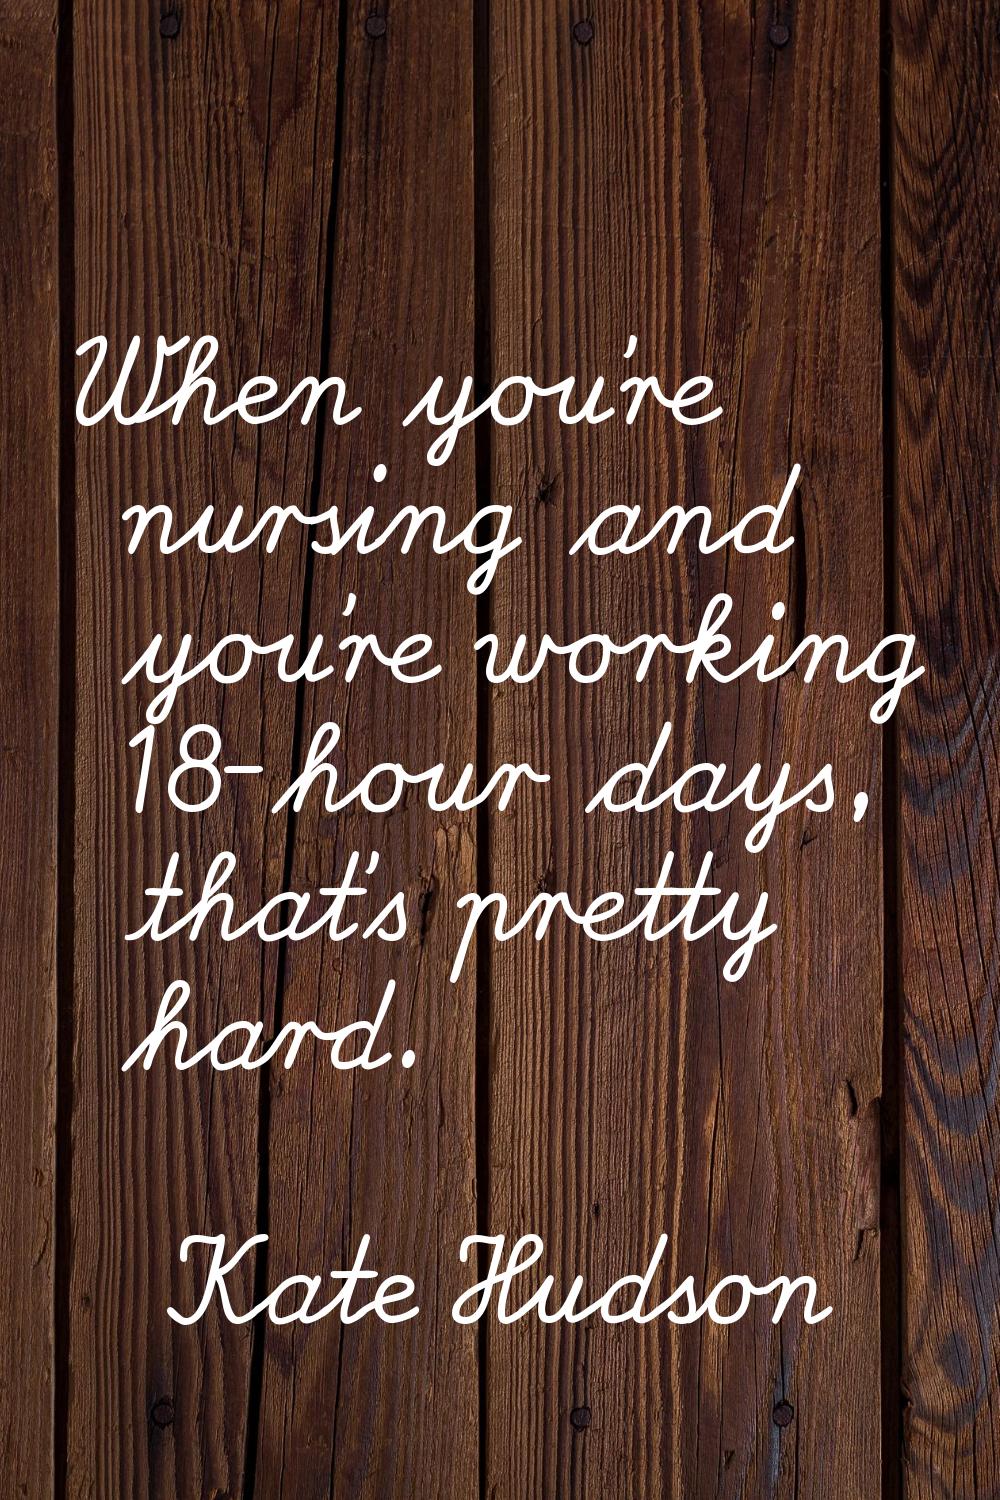 When you're nursing and you're working 18-hour days, that's pretty hard.